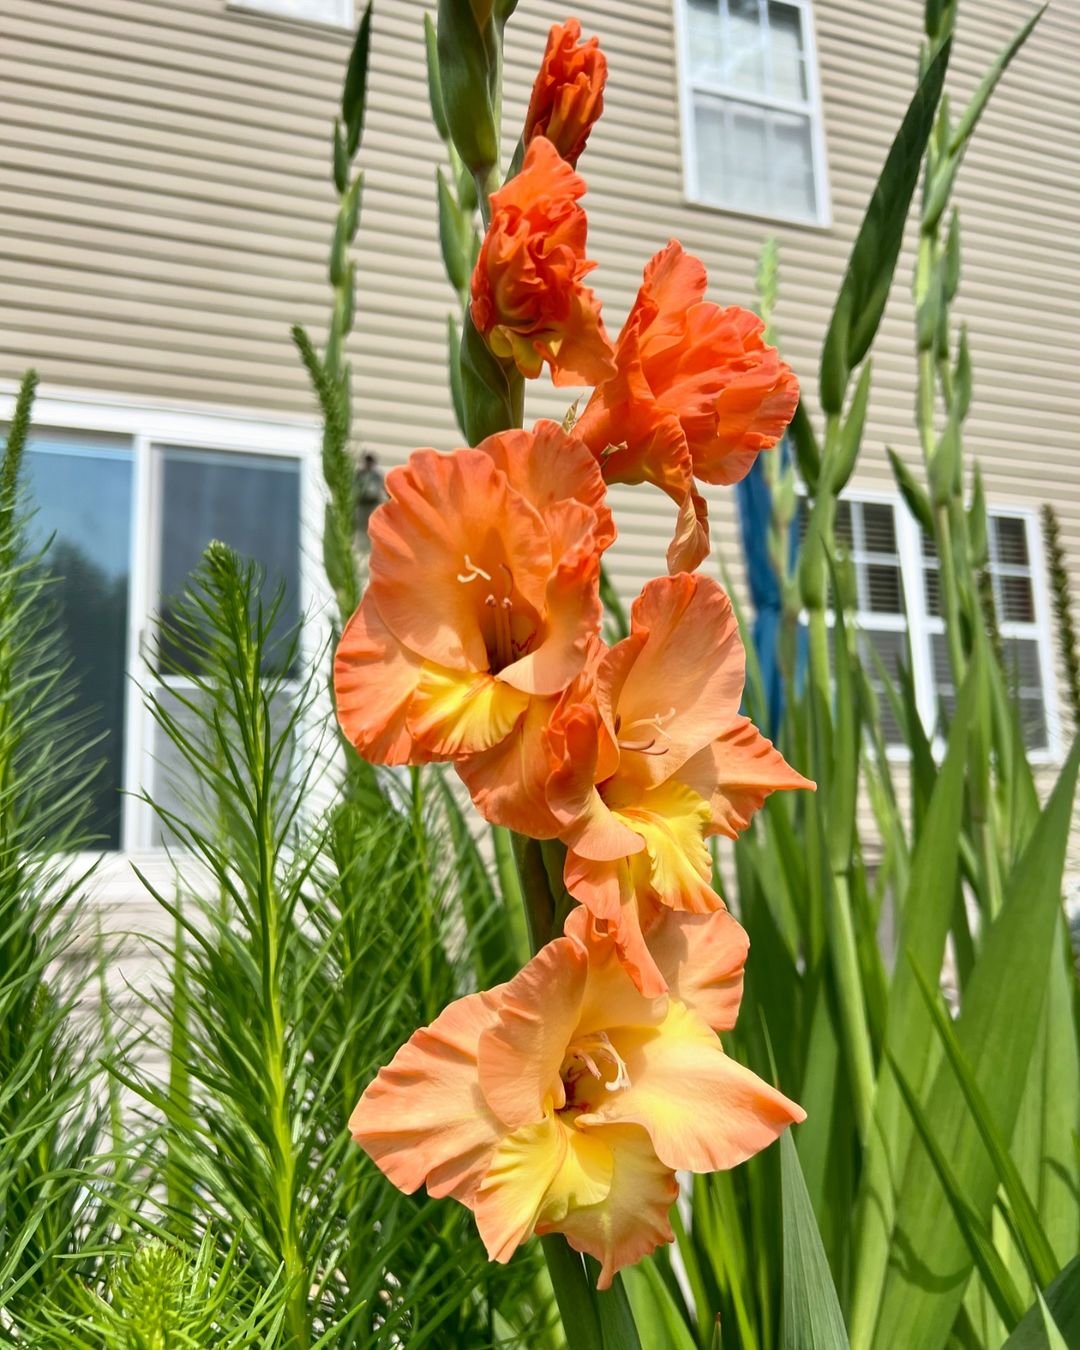 Orange Gladiolus flower blooming in front of a house.